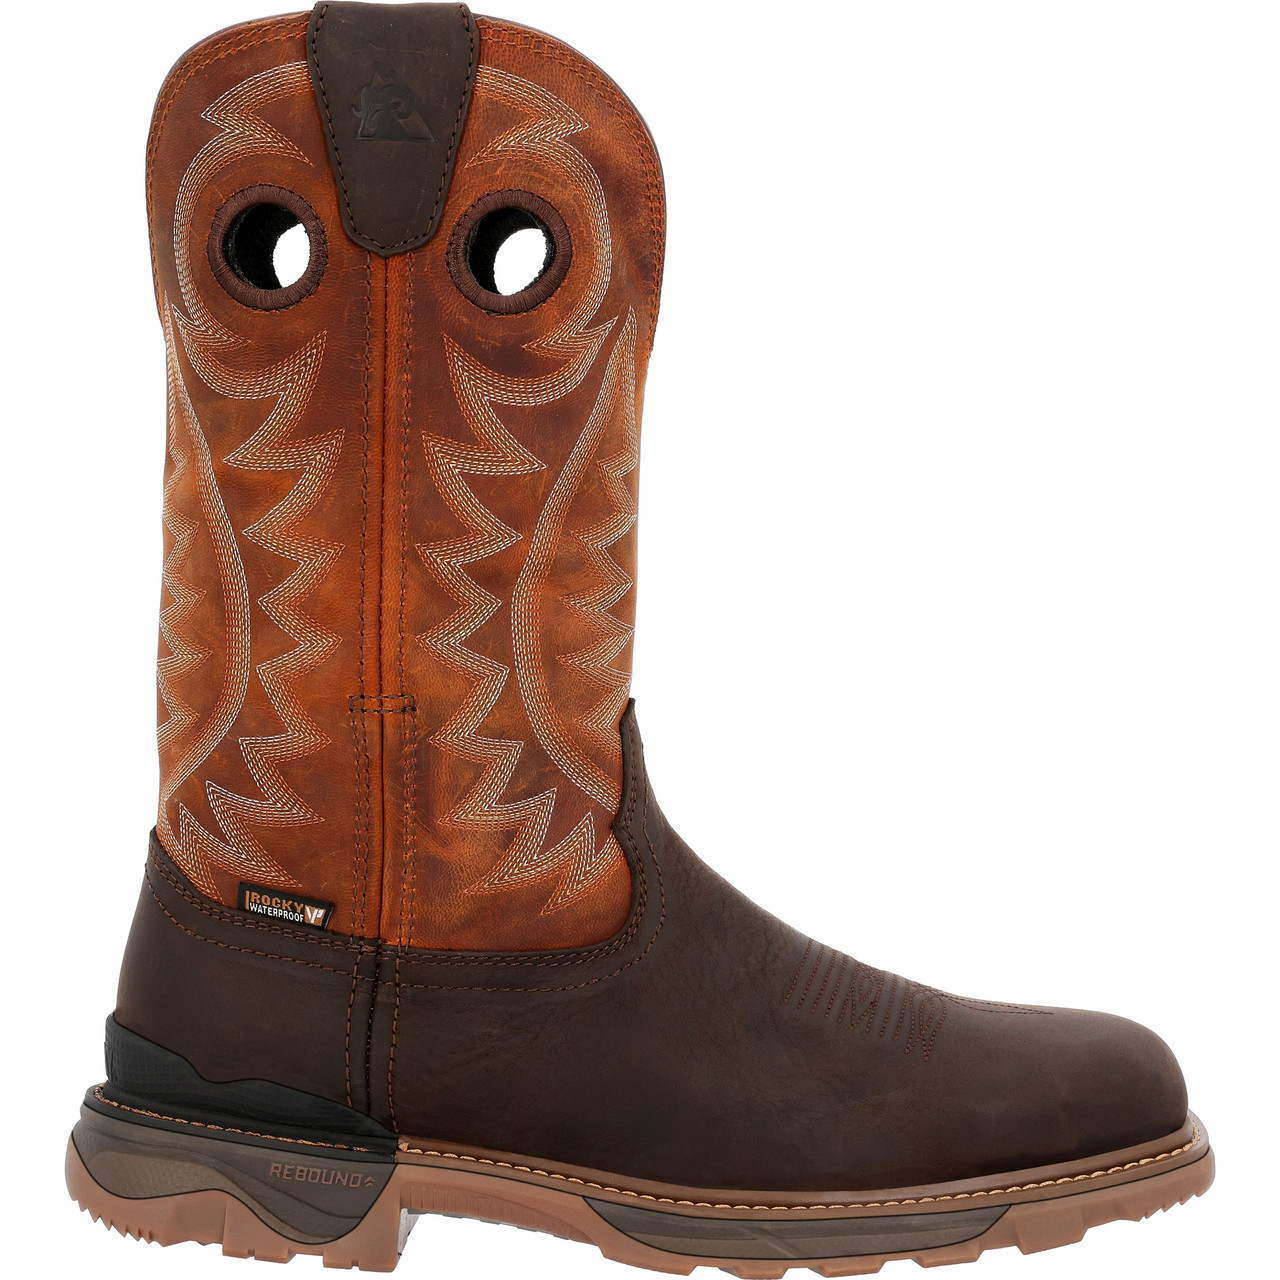 ROCKY CARBON 6 WESTERN BOOTS RKW0415